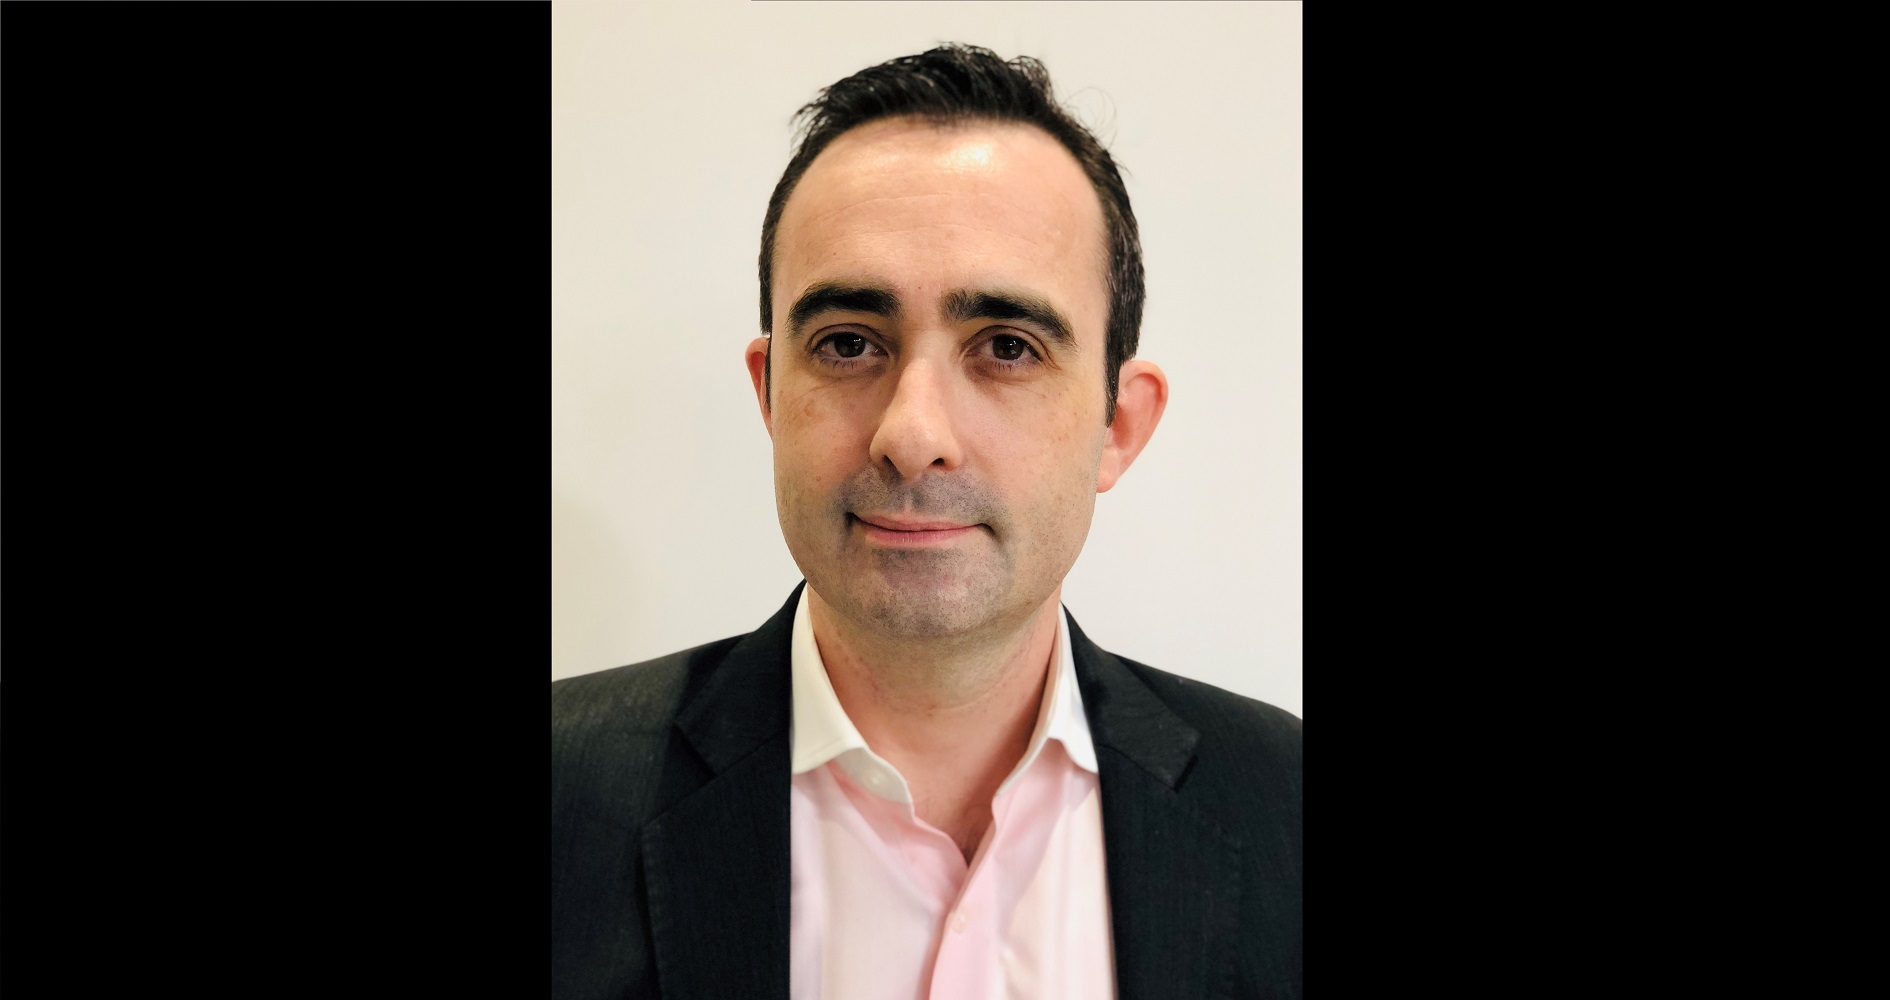 Krohne Group appoints Jonathan Ashton as Head of Marketing and Communications for the MENA region